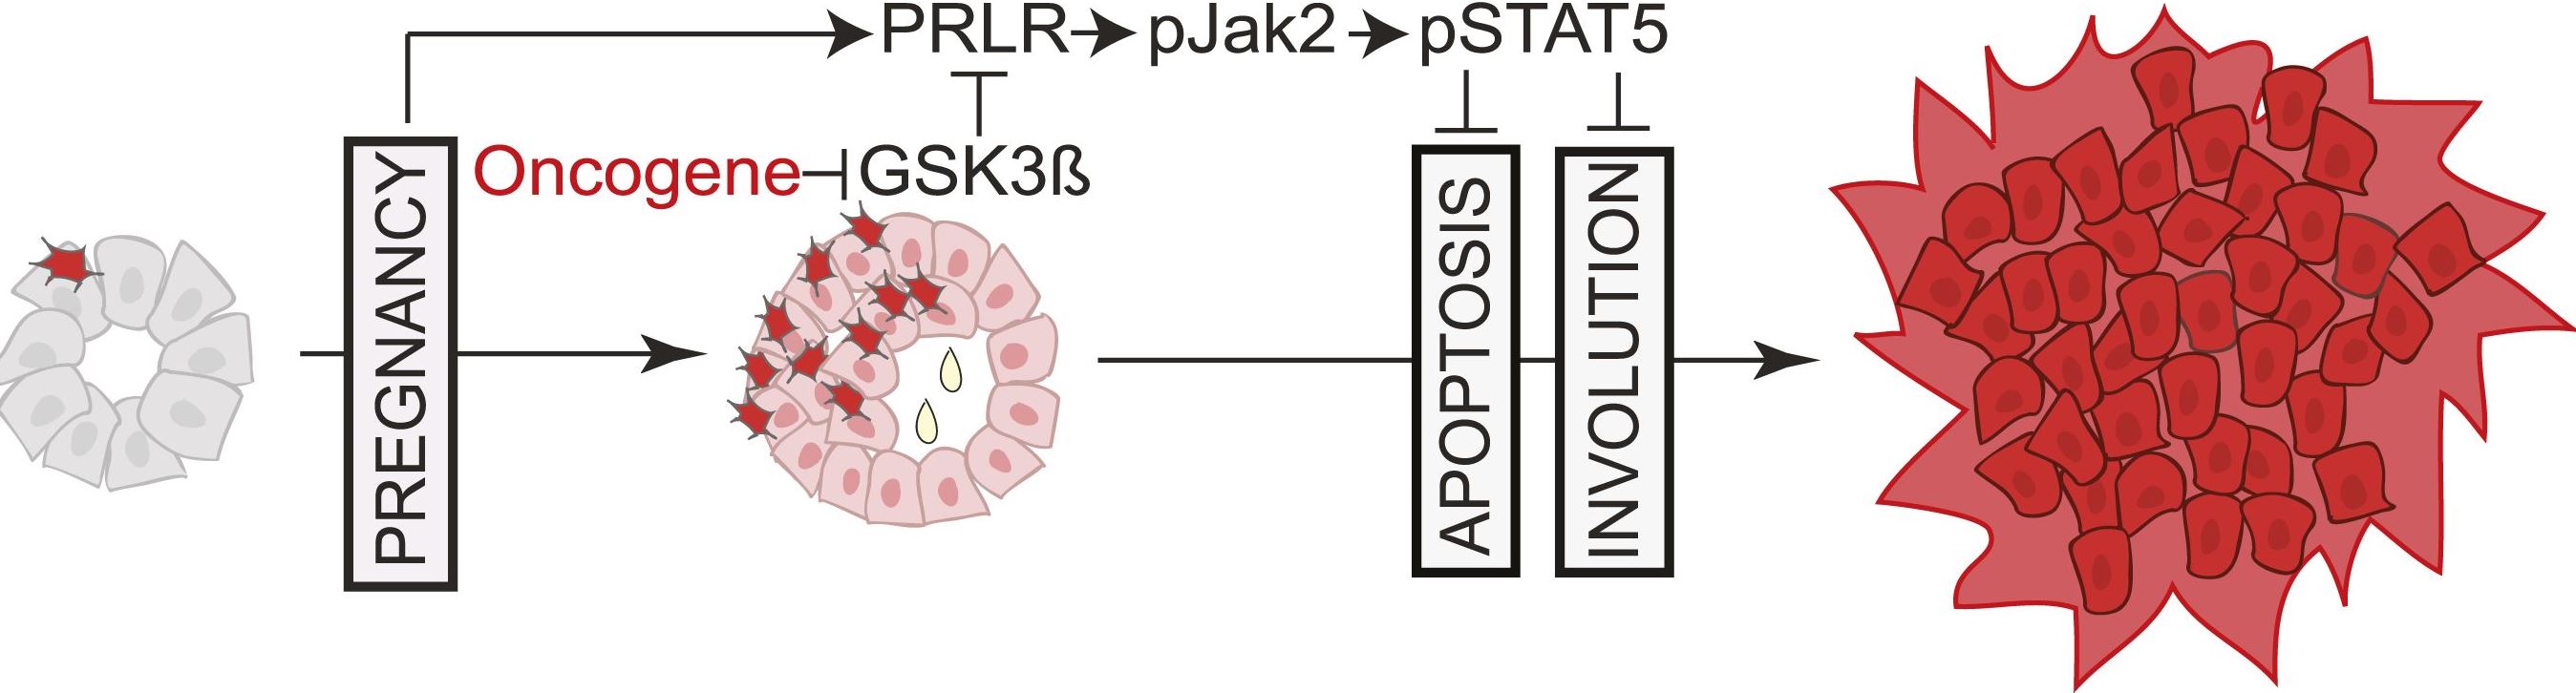 The breast cells with oncogenic activation (shown in red) progress to cancer slowly because apoptosis or programmed cells death provides a barrier to cancer. However, when a woman becomes pregnant, the preexisting precancerous cells activate a pathway called PRLR-Jak2-STAT5 signaling (becoming pink), and maintain the activated state of this pathway even after the baby is weaned. Photo courtesy of the journal eLife and Dr. Yi Li.